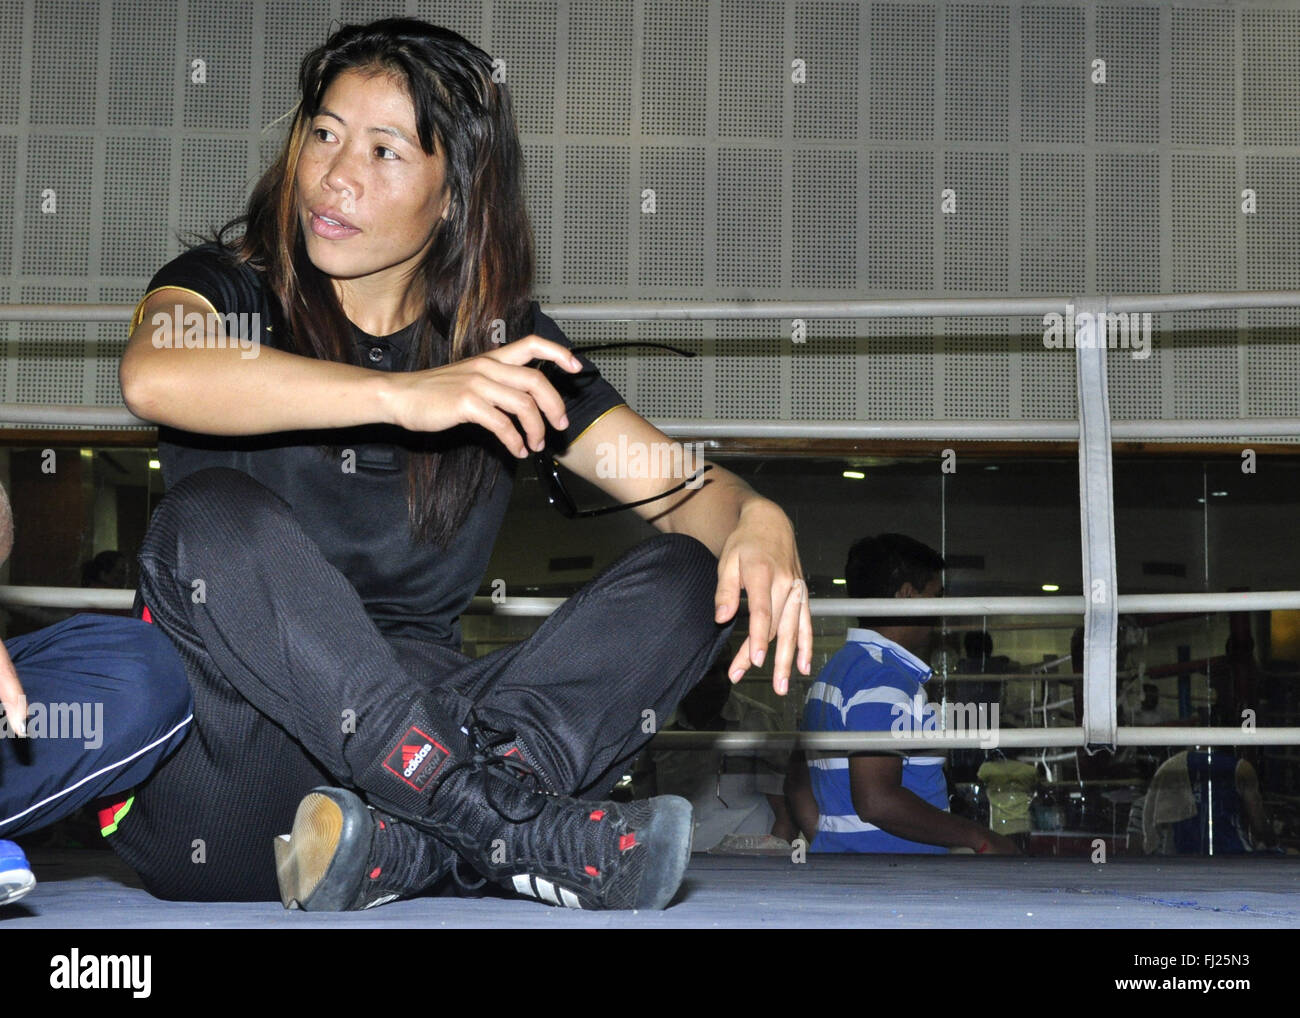 Patiala, India. 27th Aug, 2014. Indian Women Boxer, MC Mary Kom at NSNIS. If Pinki Rani Jangra wins, she will fight Mary Kom to decide who will go for Olympics qualifiers in the 51kg category. © Rajesh Sachar/Pacific Press/Alamy Live News Stock Photo